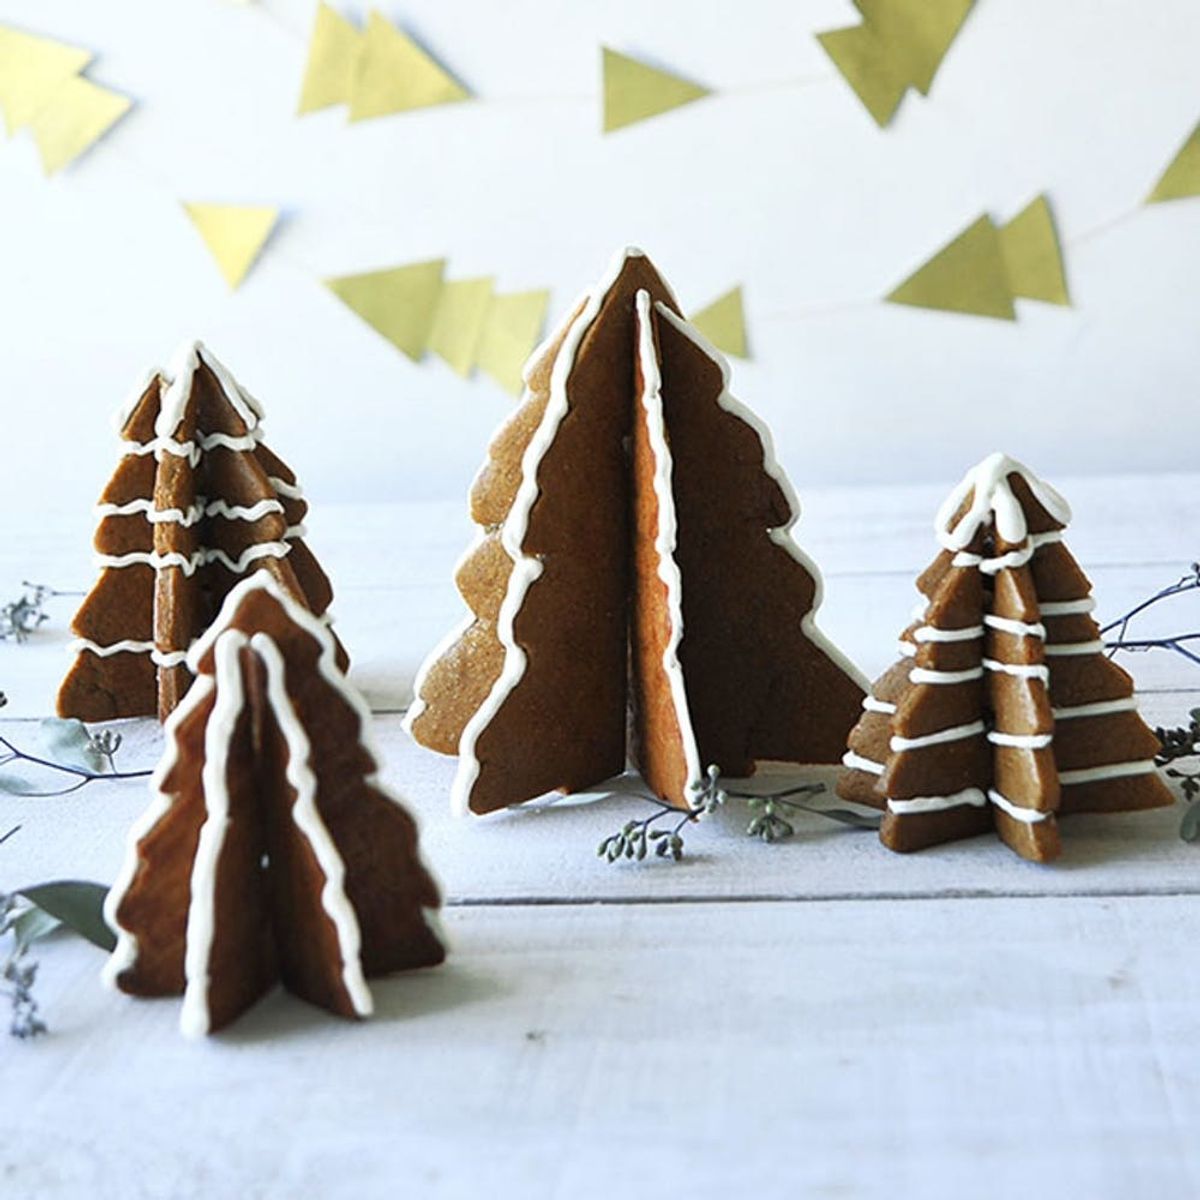 You’ve Never Eaten Gingerbread like This Before